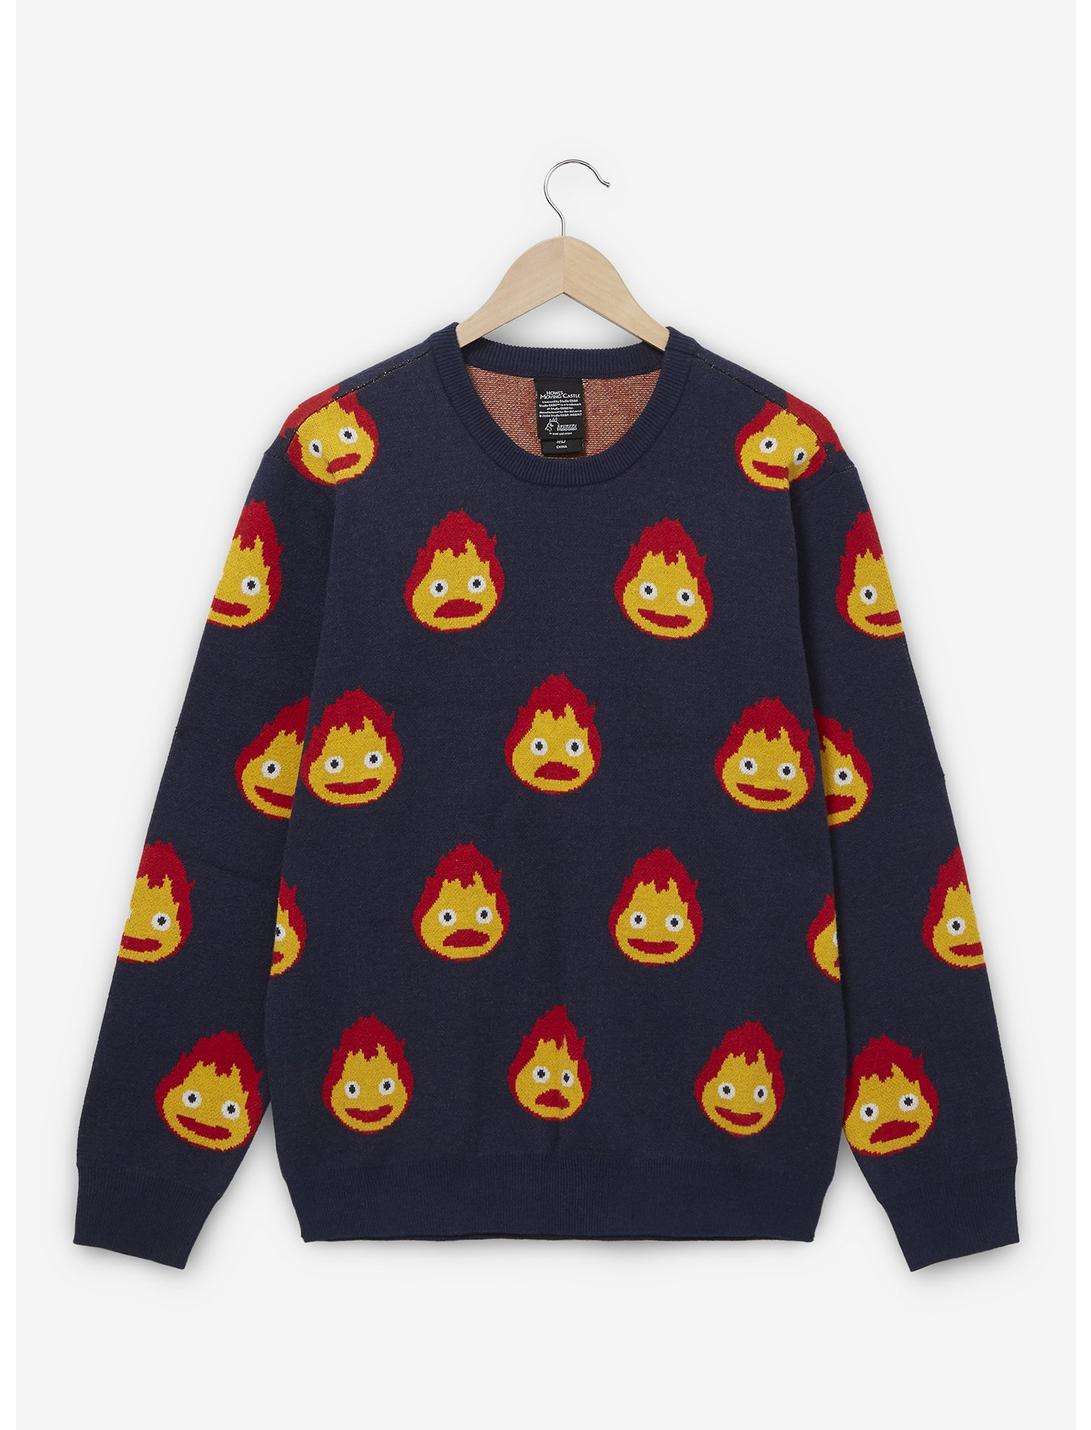 Studio Ghibli Howl's Moving Castle Calcifer Expressions Allover Print Sweater - BoxLunch Exclusive, NAVY, hi-res